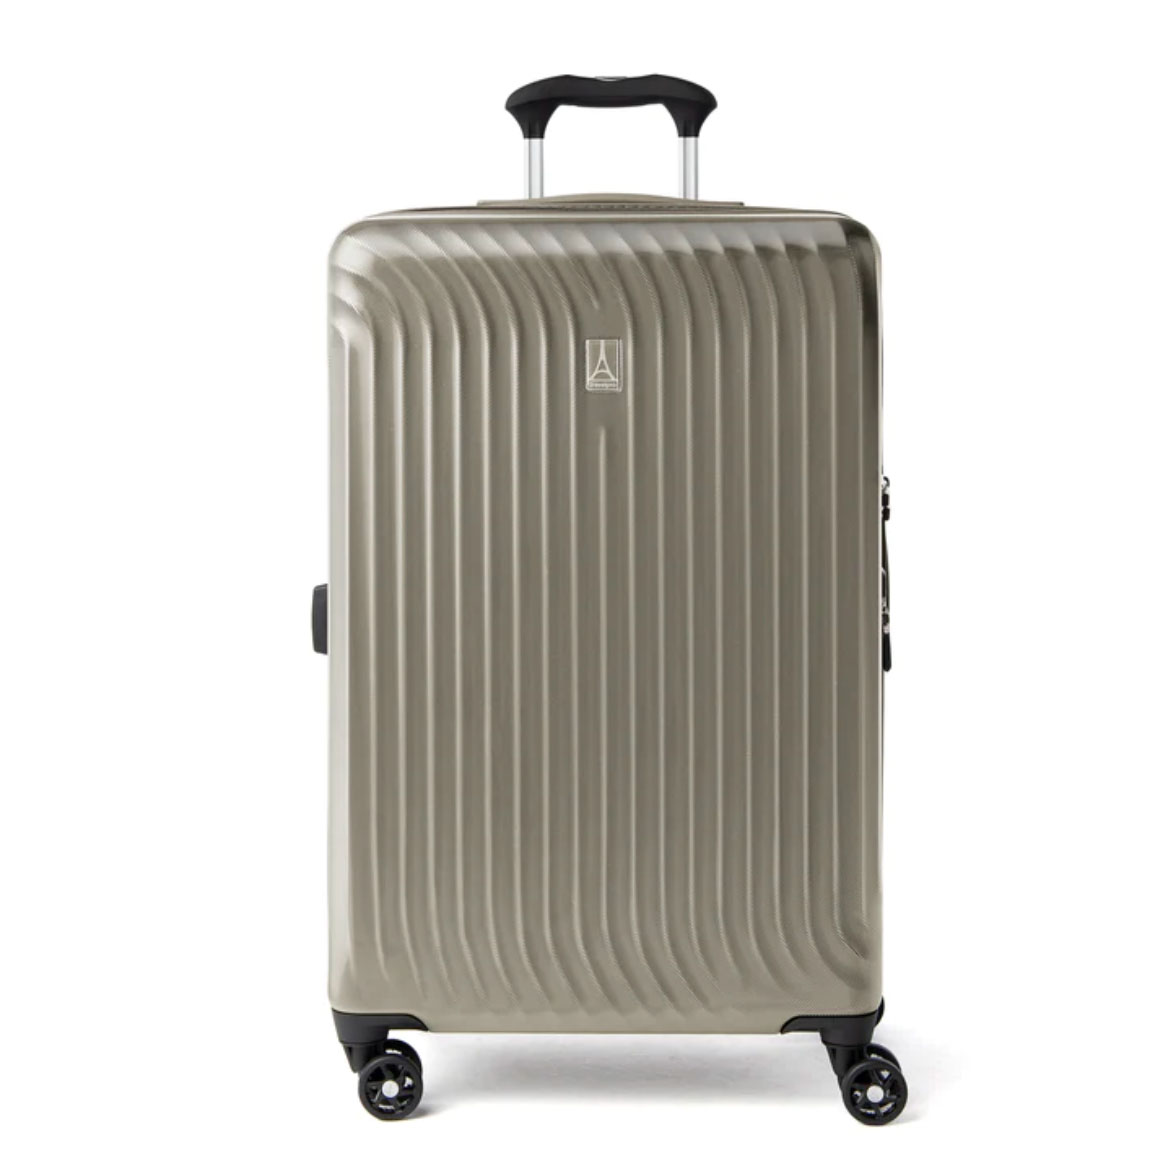 Frontview of hardside luggage in champagne